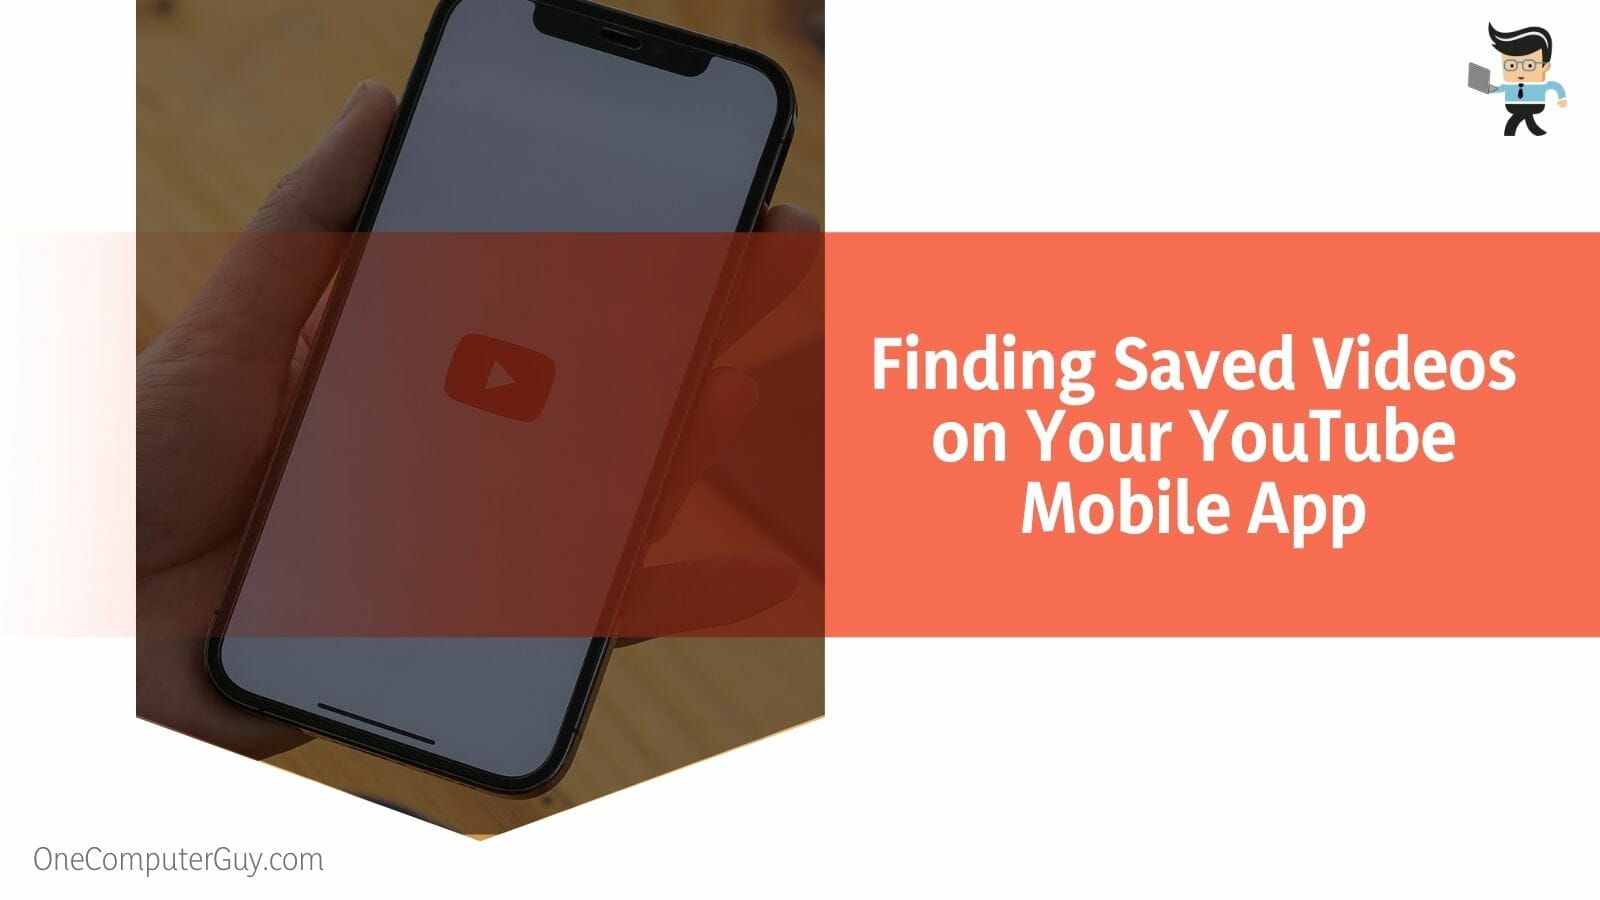 Finding Saved Videos on Your YouTube Mobile App